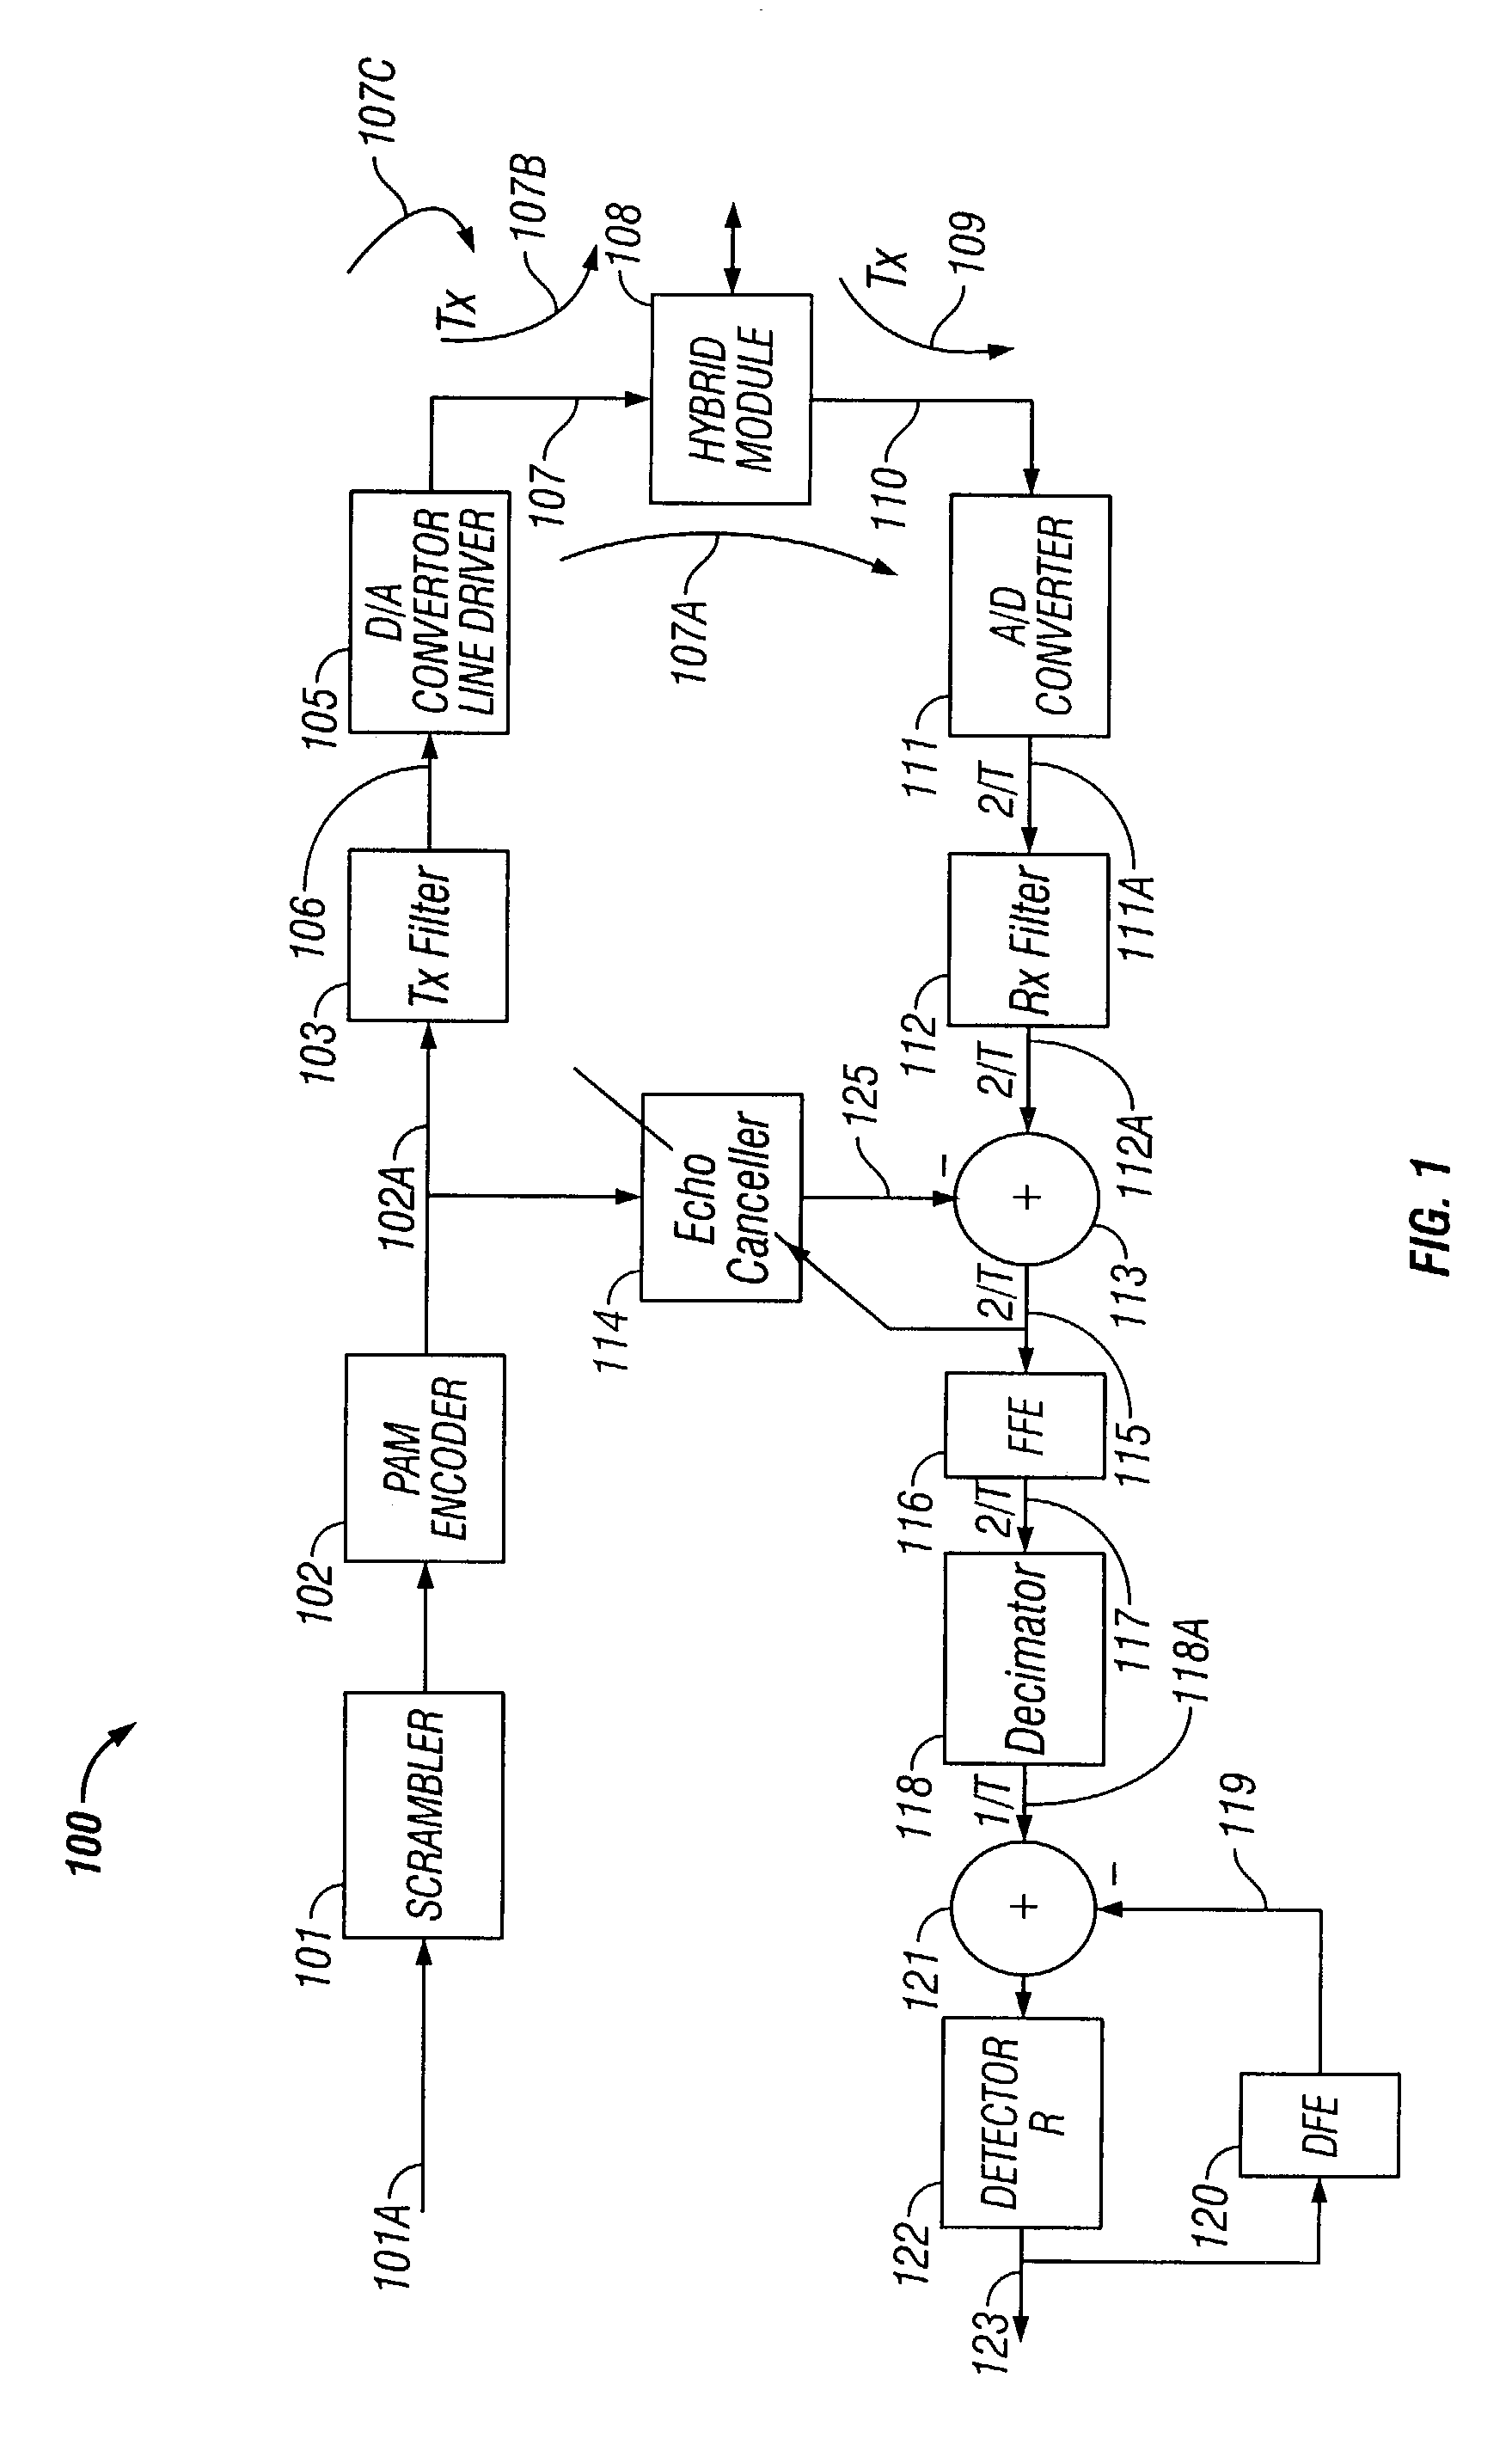 Method and system for data rate optimization in a digital communication system